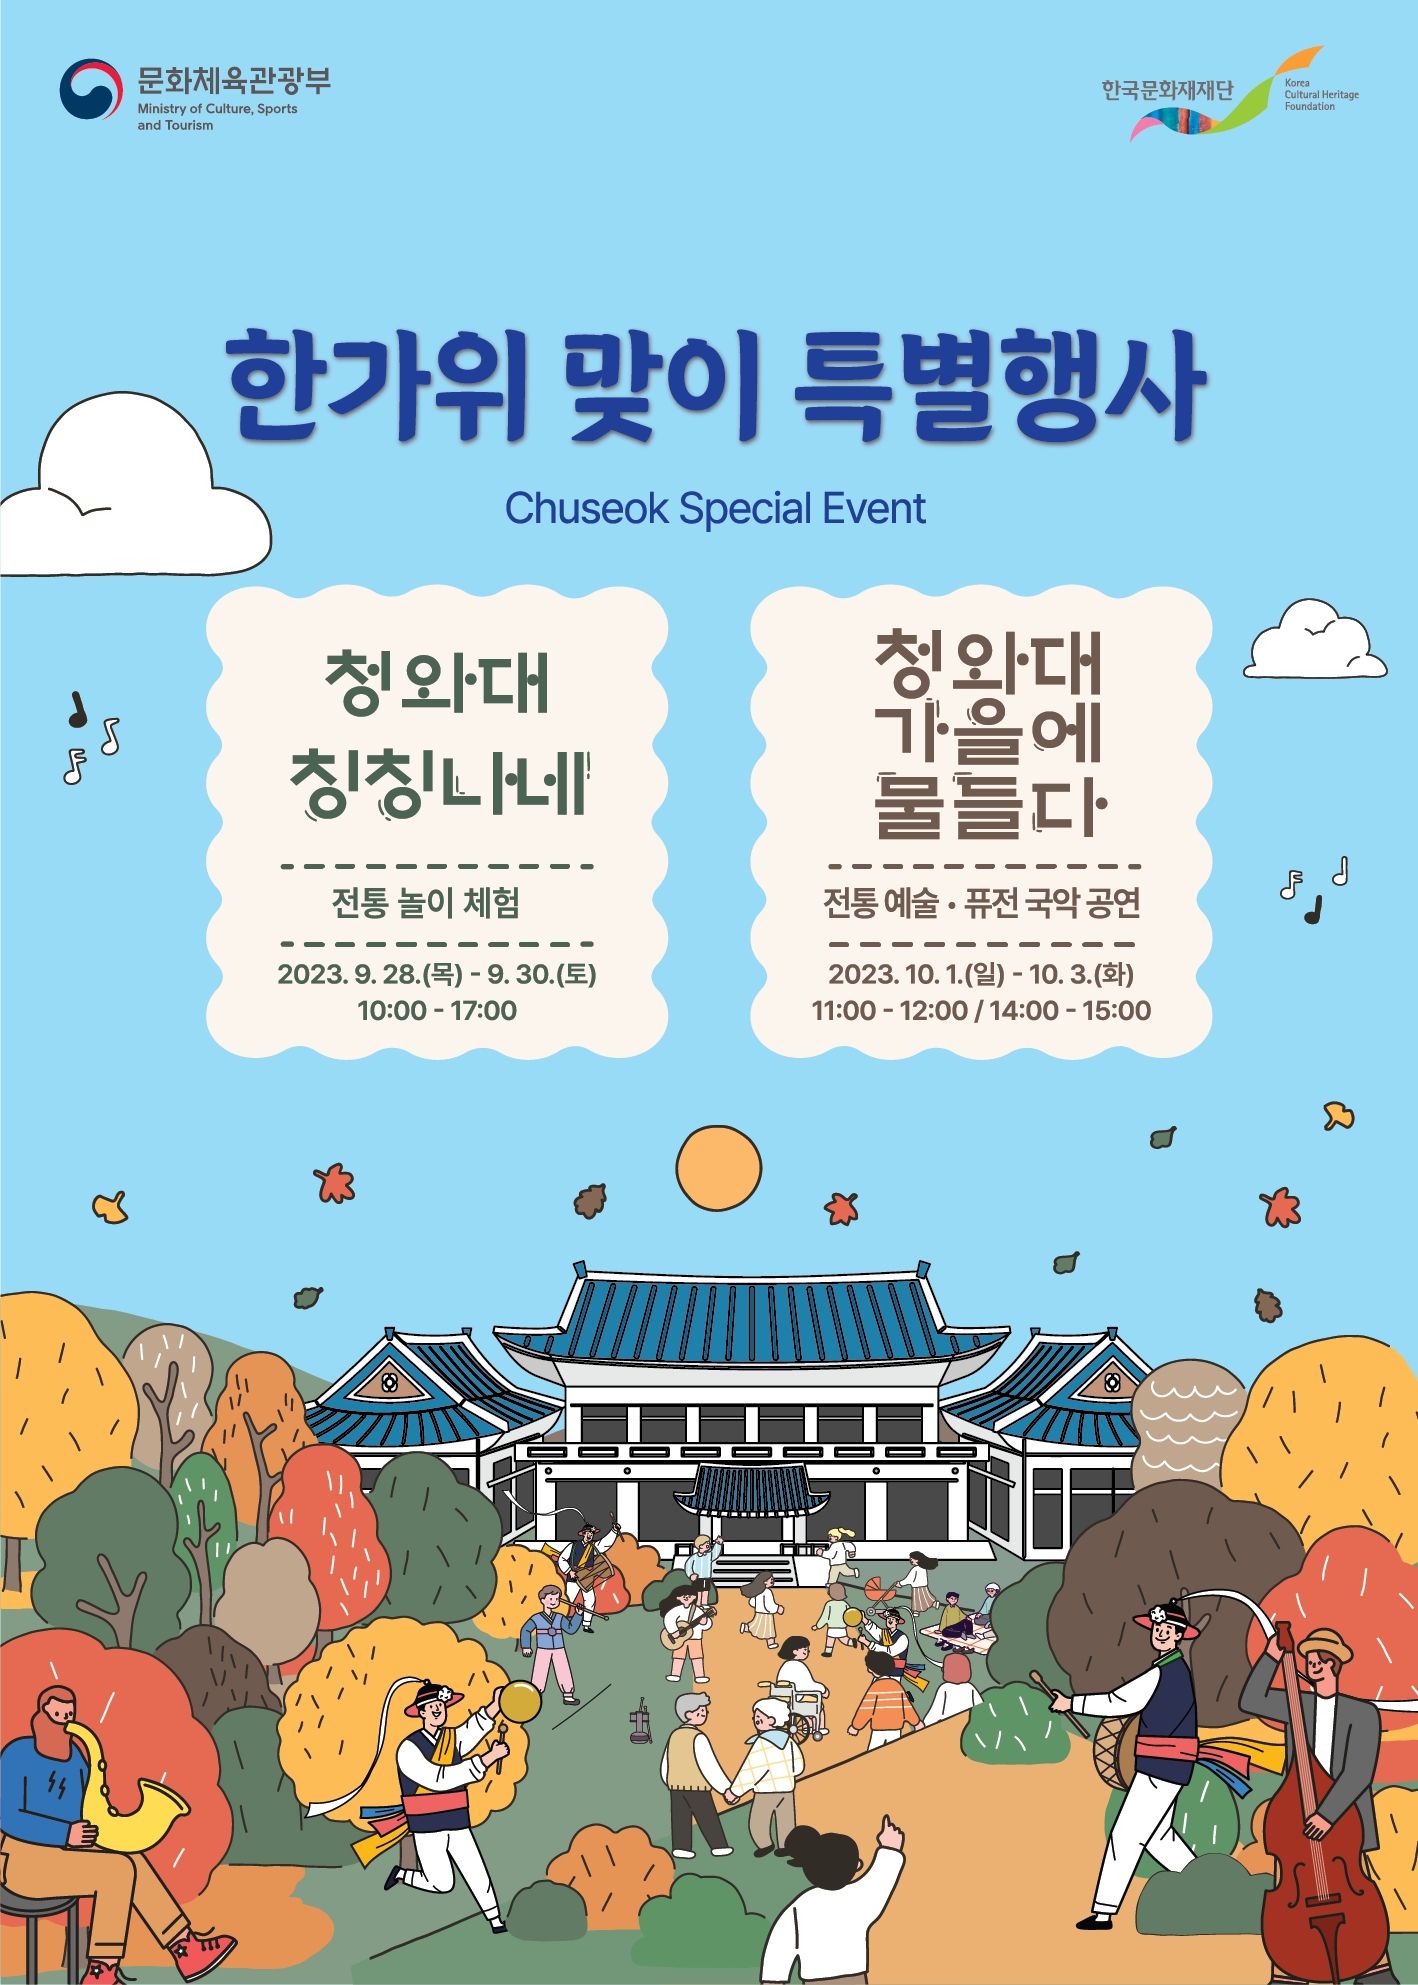 a special occasion for Chuseok